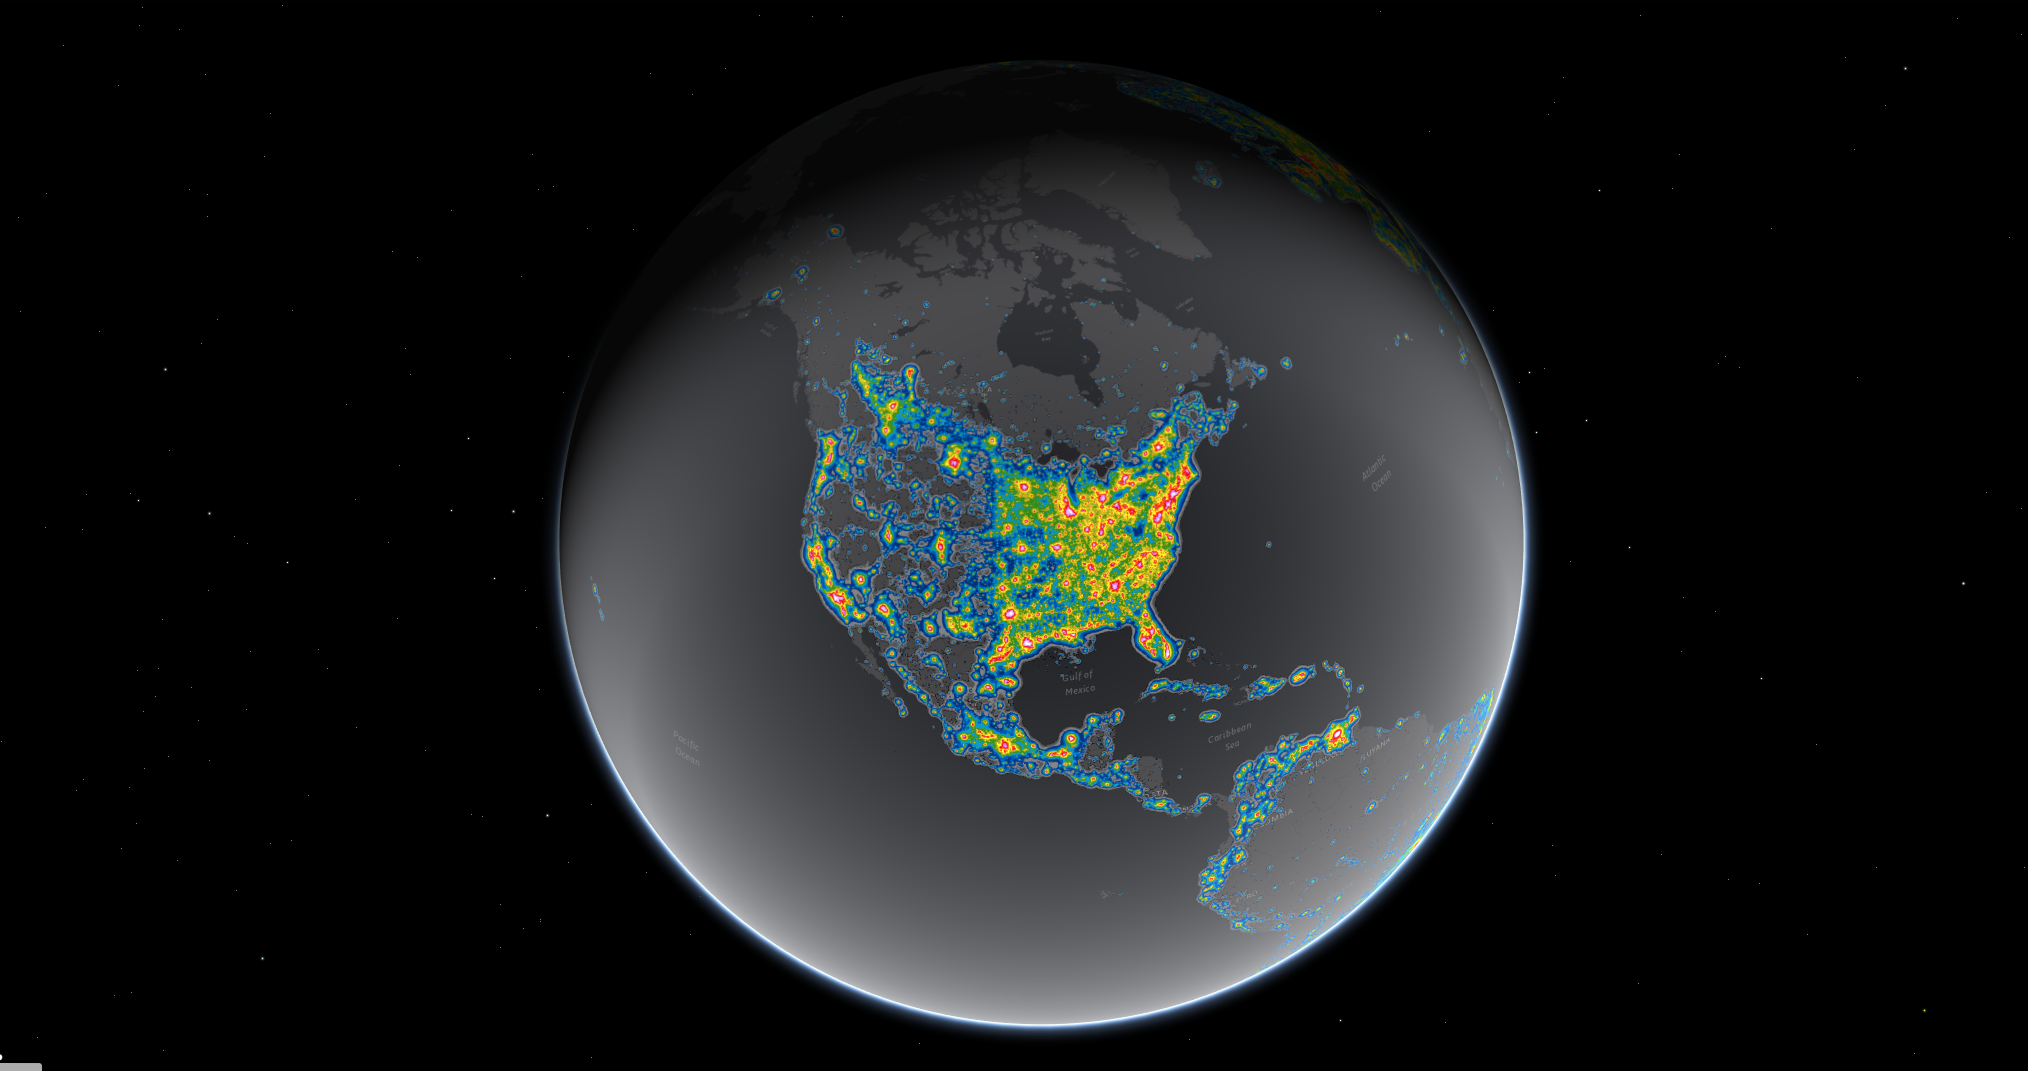 Light pollution now blots out the Milky Way for eight in ten Americans. Bright areas in this map show where the sky glow from artificial lighting obscures the stars and constellations. View the atlas online: https://cires.colorado.edu/artificial-sky.